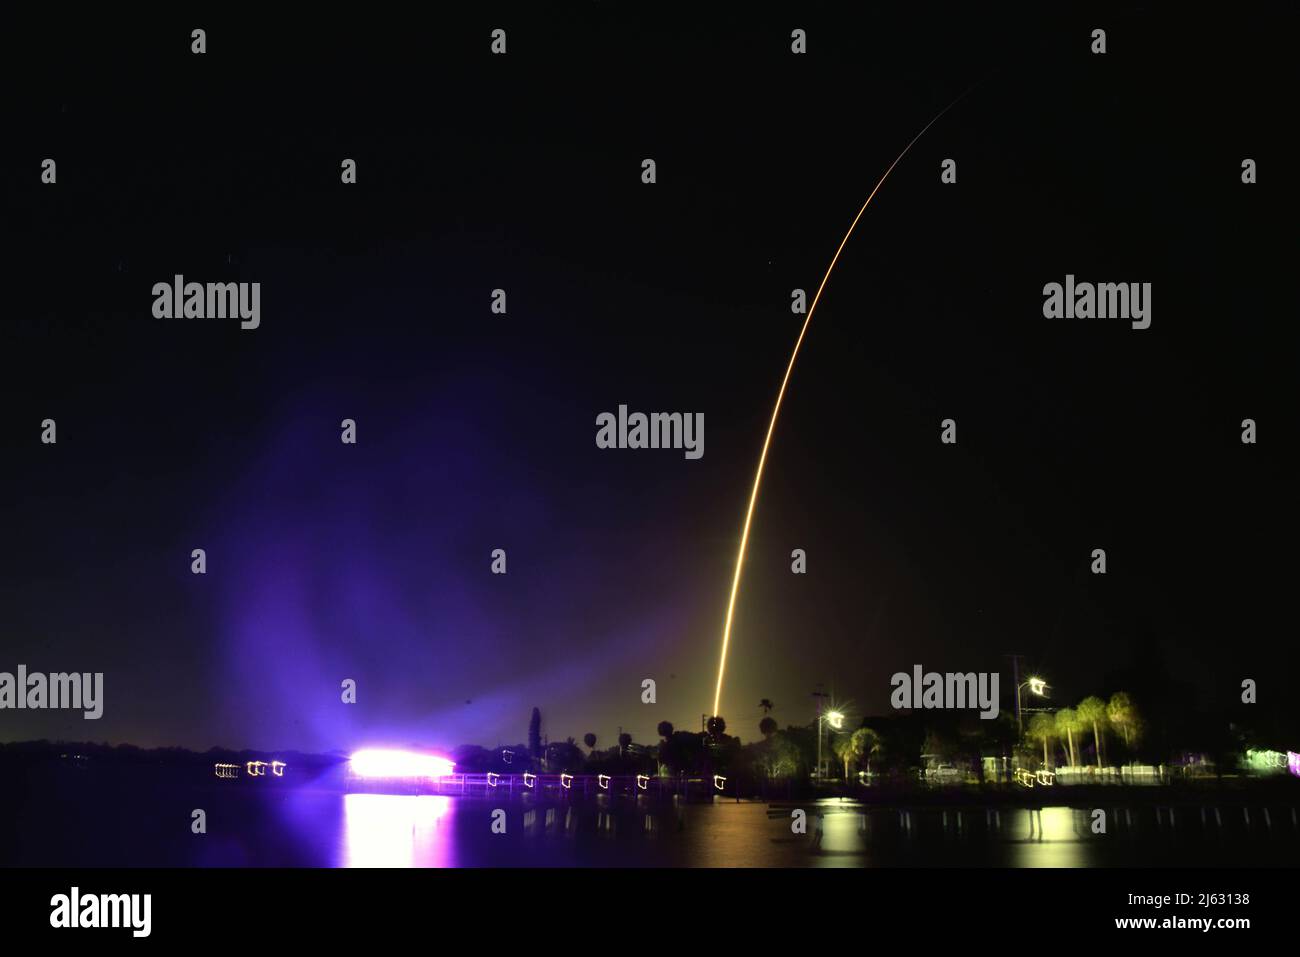 Kennedy Space Center, Brevard County, Florida, USA. April 27, 2022. SpaceX launched Crew-4 to the International Space Station from Launch Complex 39A at 3:52 a.m. Credit: Julian Leek/Alamy Live News Stock Photo